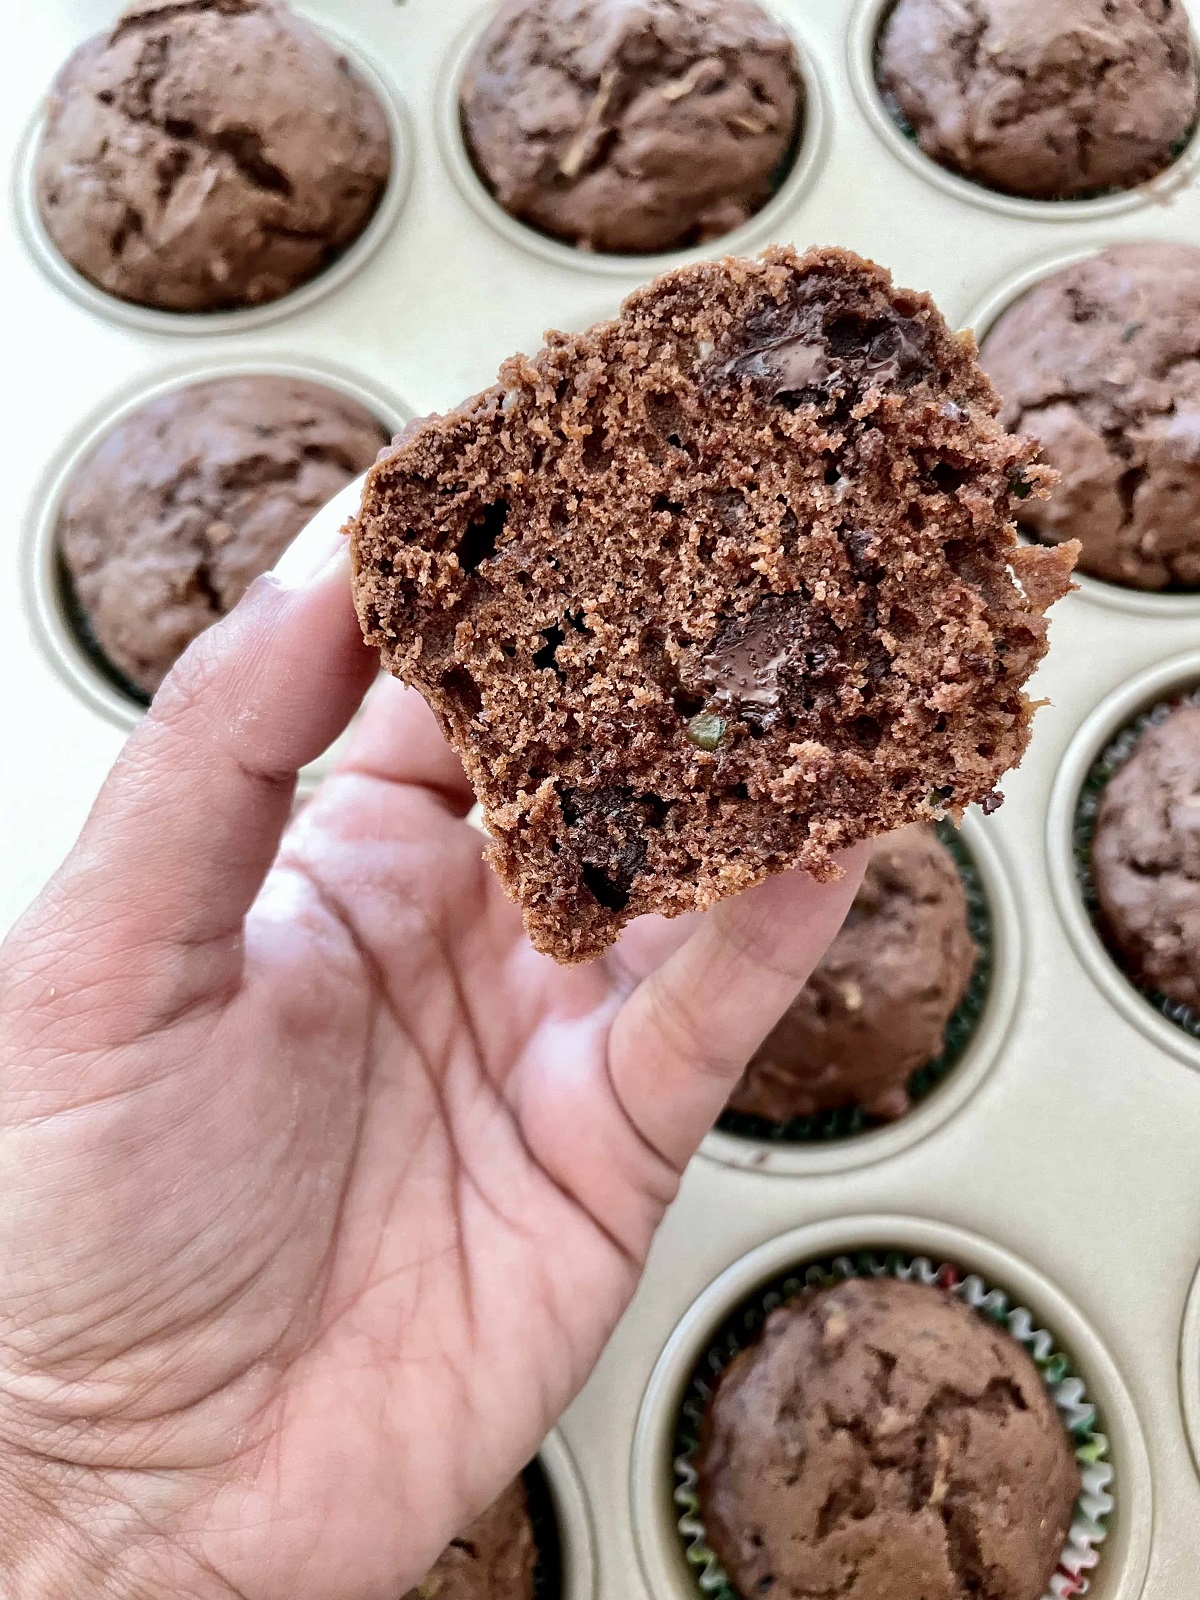 A hand holding a chocolate chip zucchini muffin that has been sliced in half